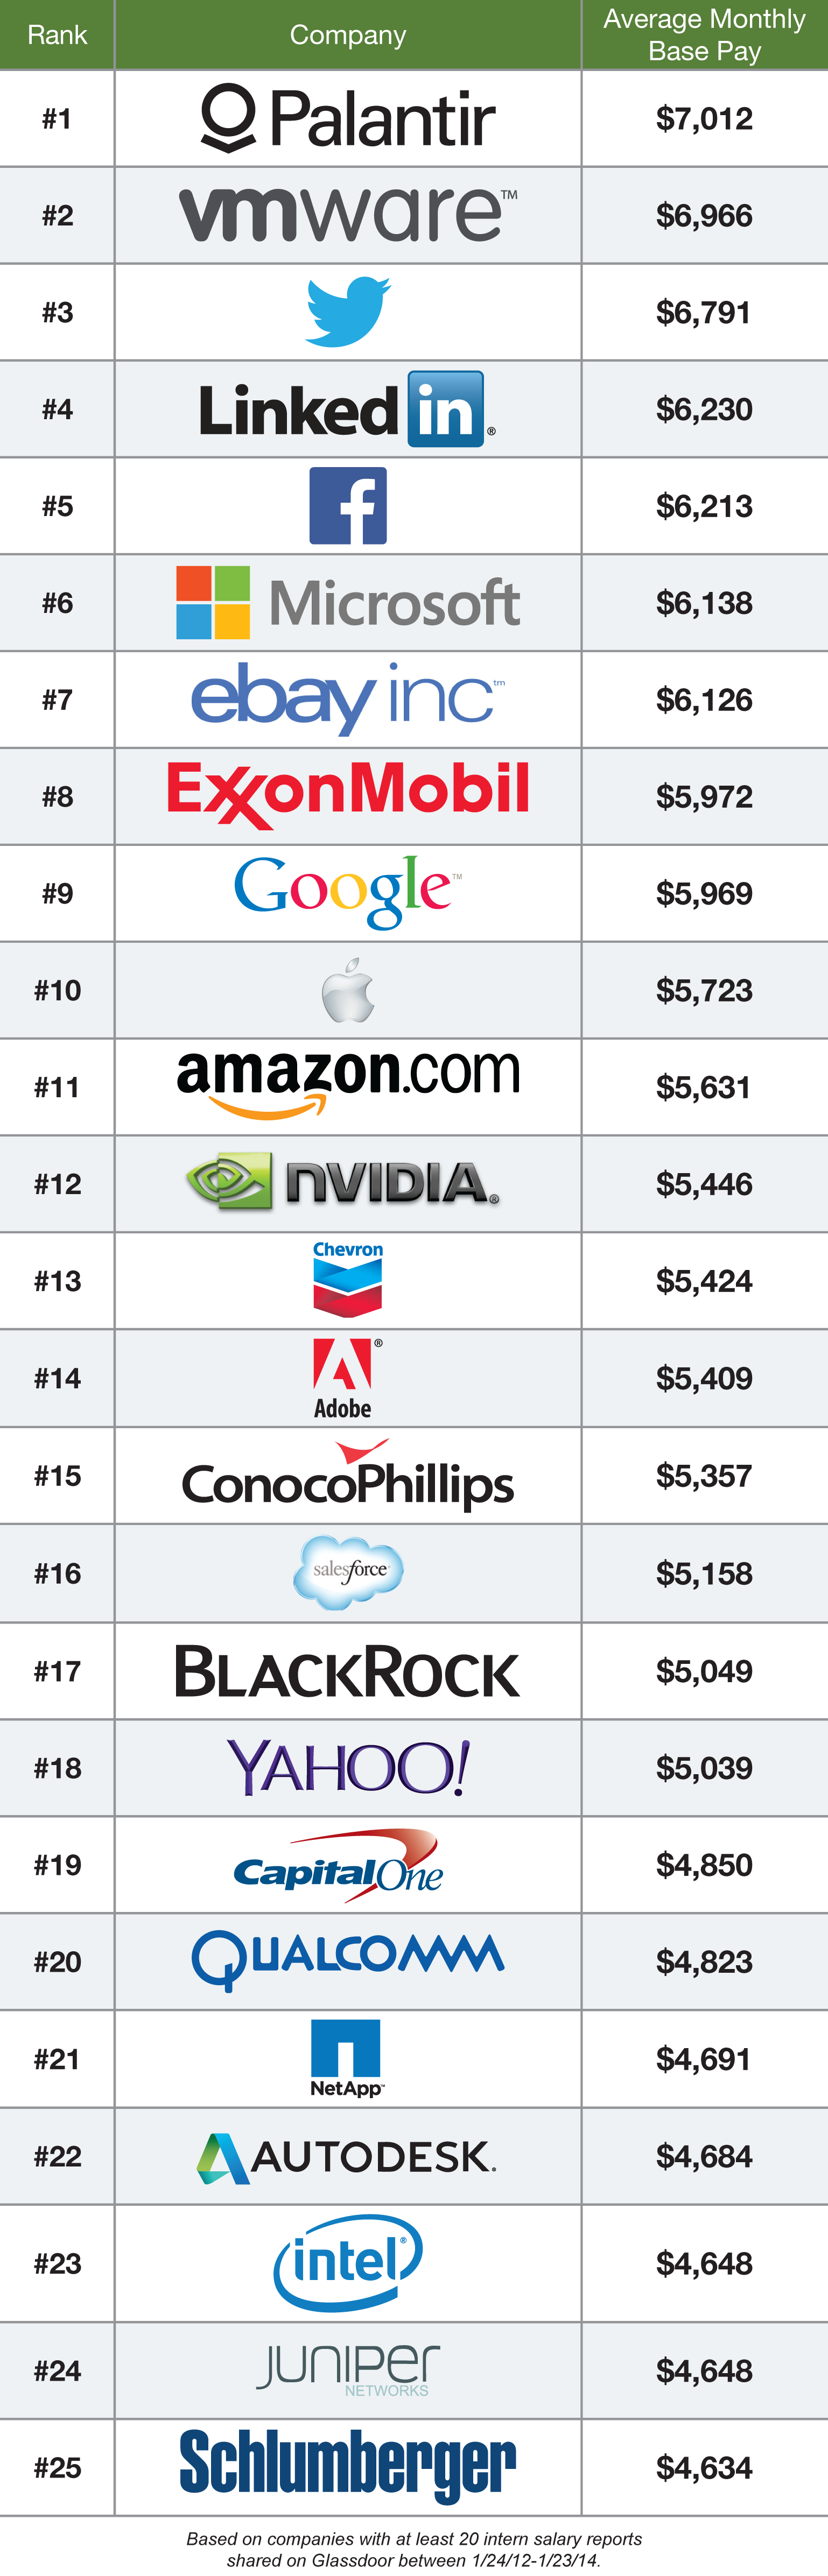 25 Highest Paying Companies For Interns 2014